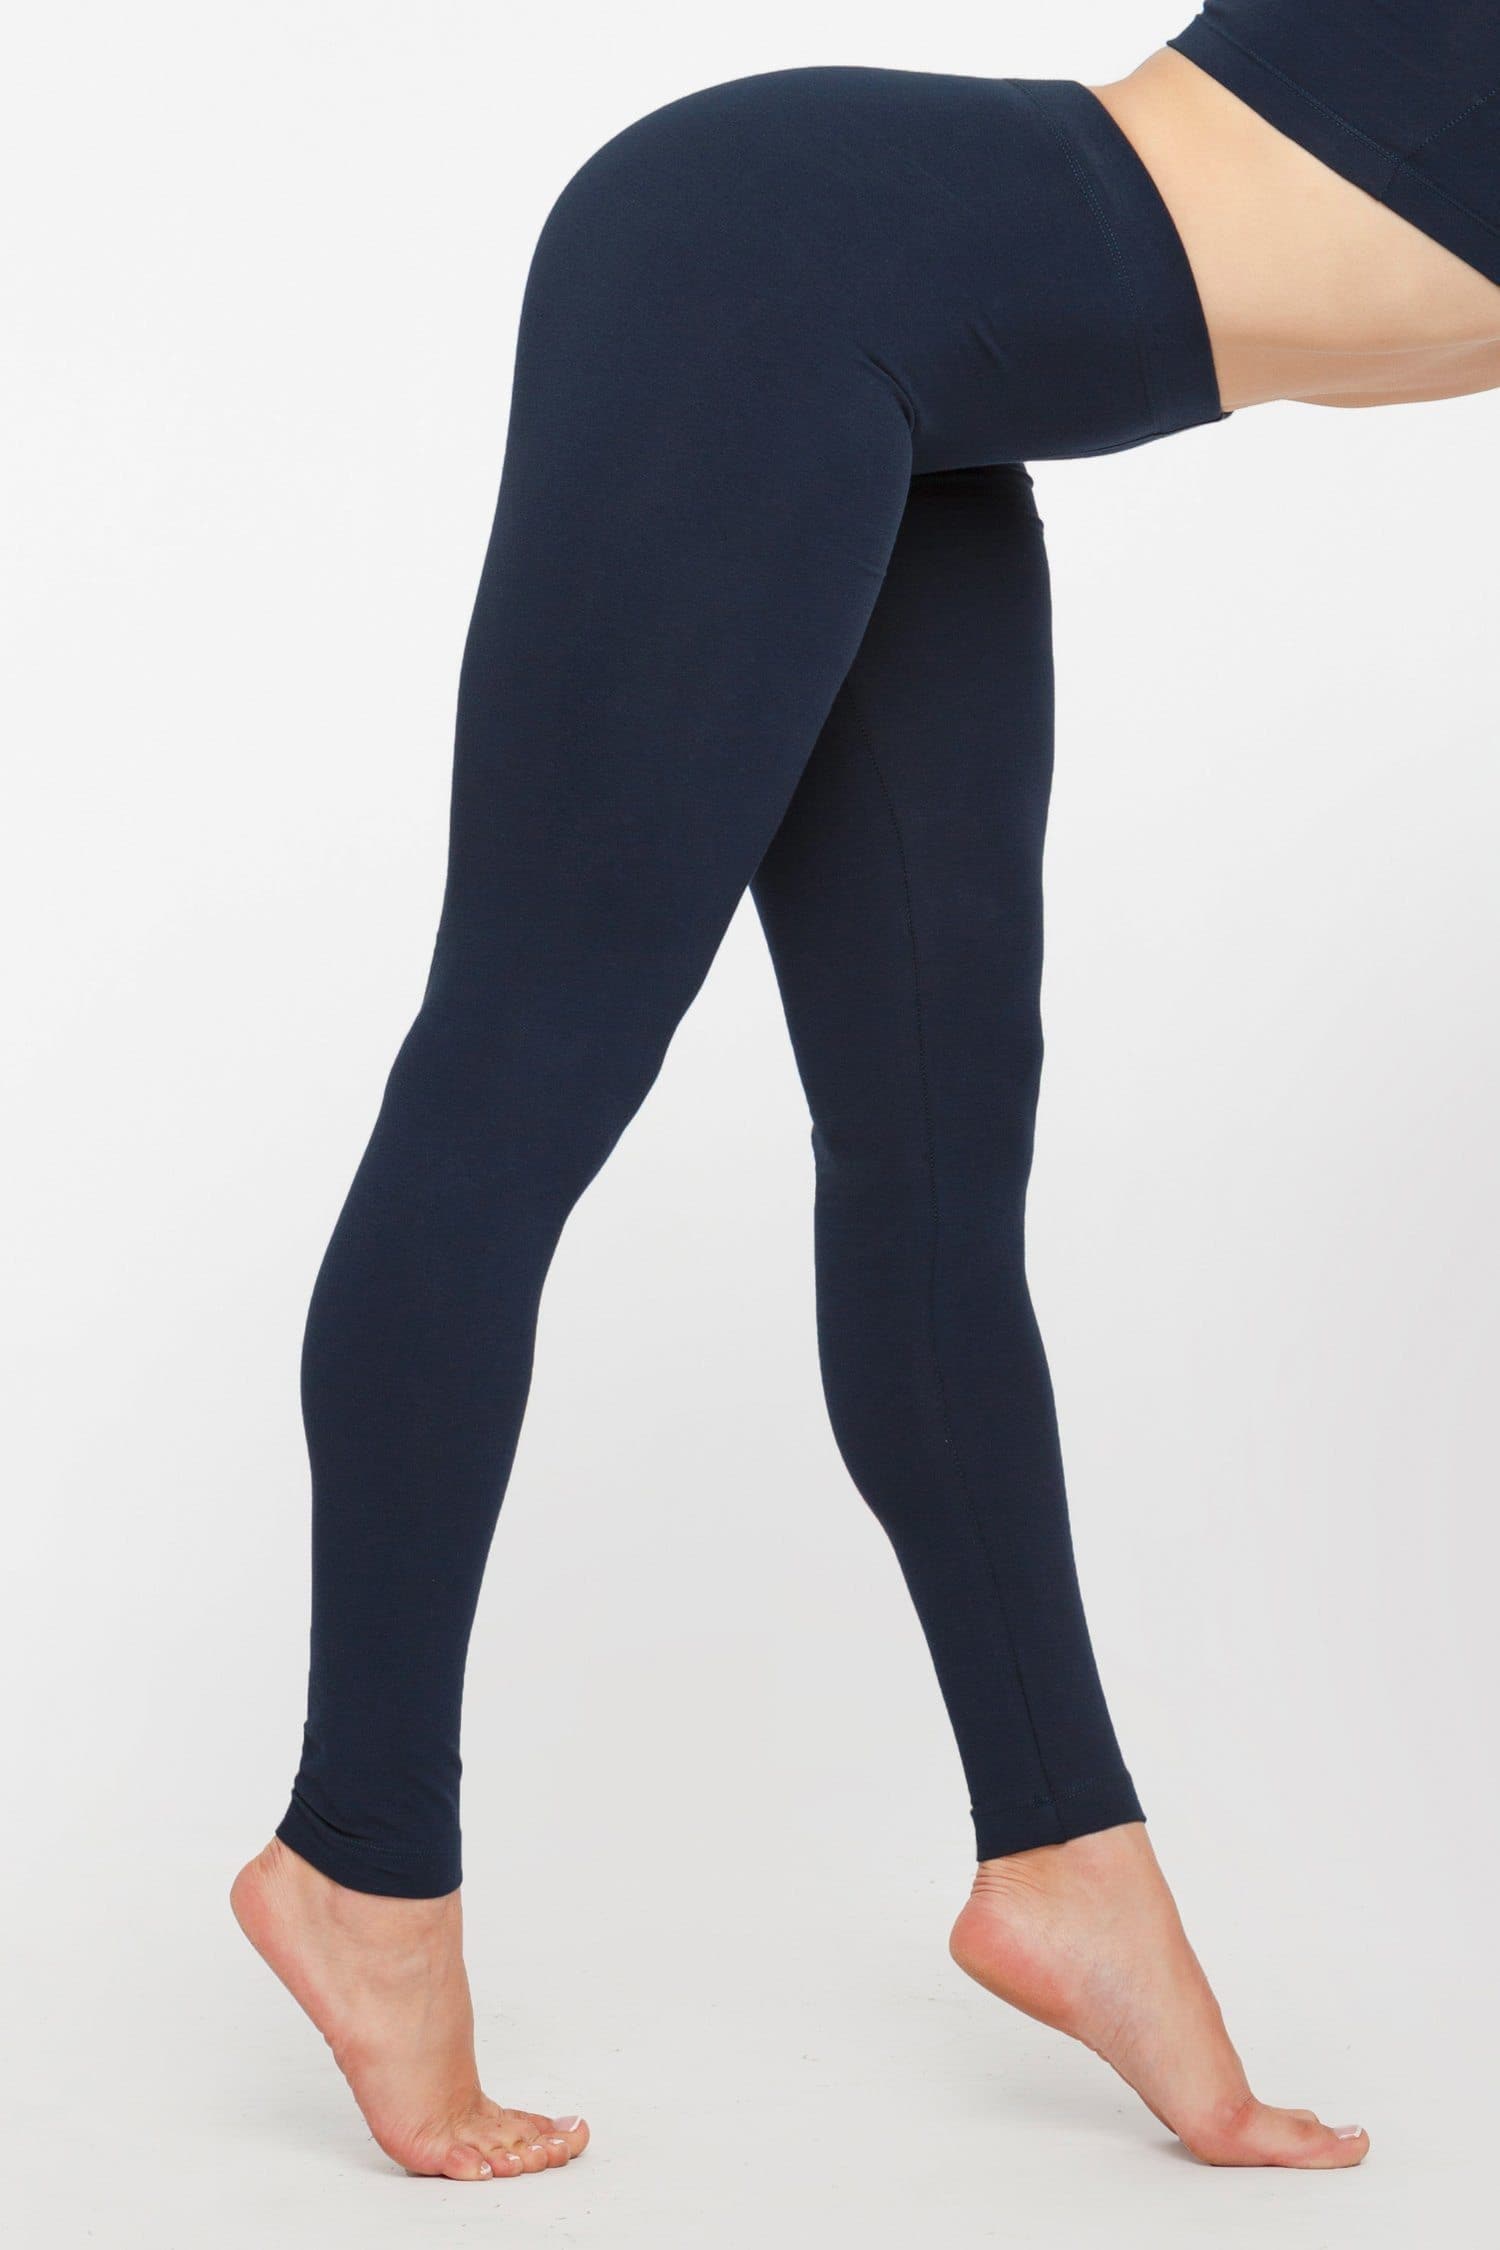 New Girls Jersey Full Length Legging With Thick Material Not See through  Age7-13